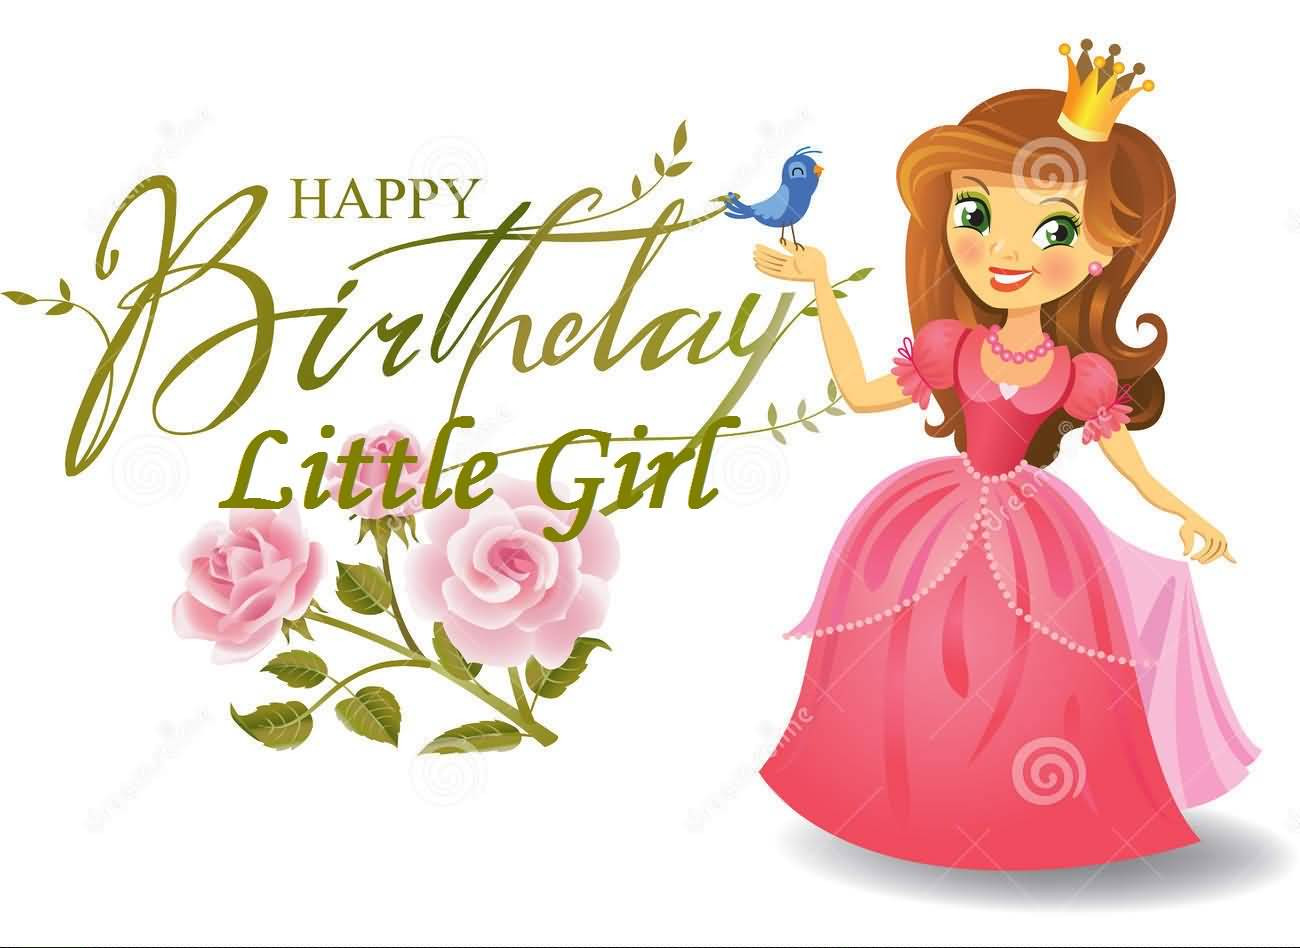 Top 25 Birthday Wishes for Little Girls - Home, Family, Style and Art Ideas